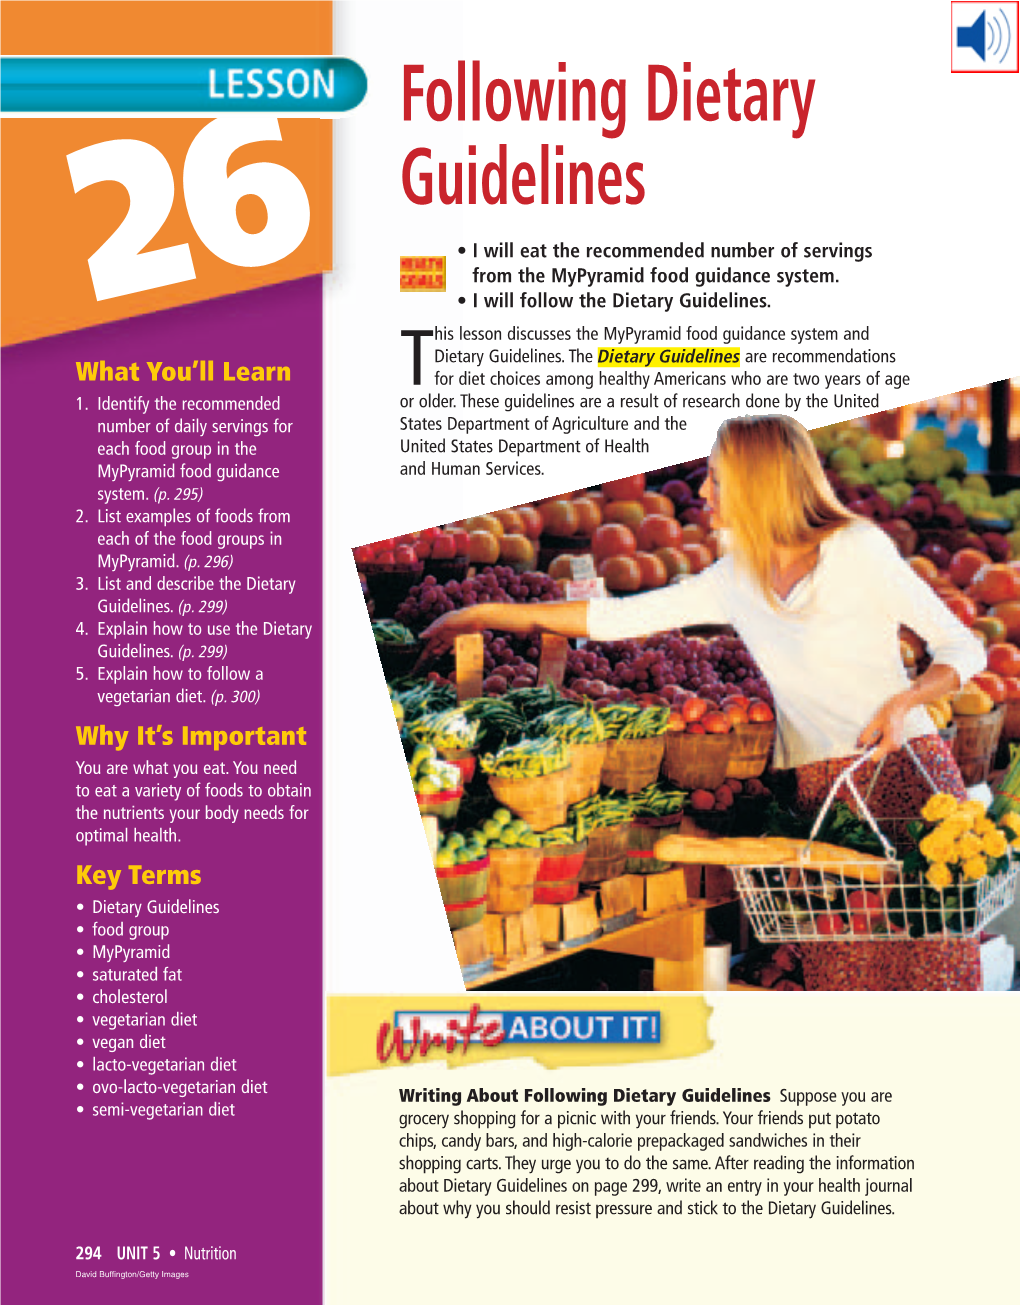 Lesson 26 Following Dietary Guidelines